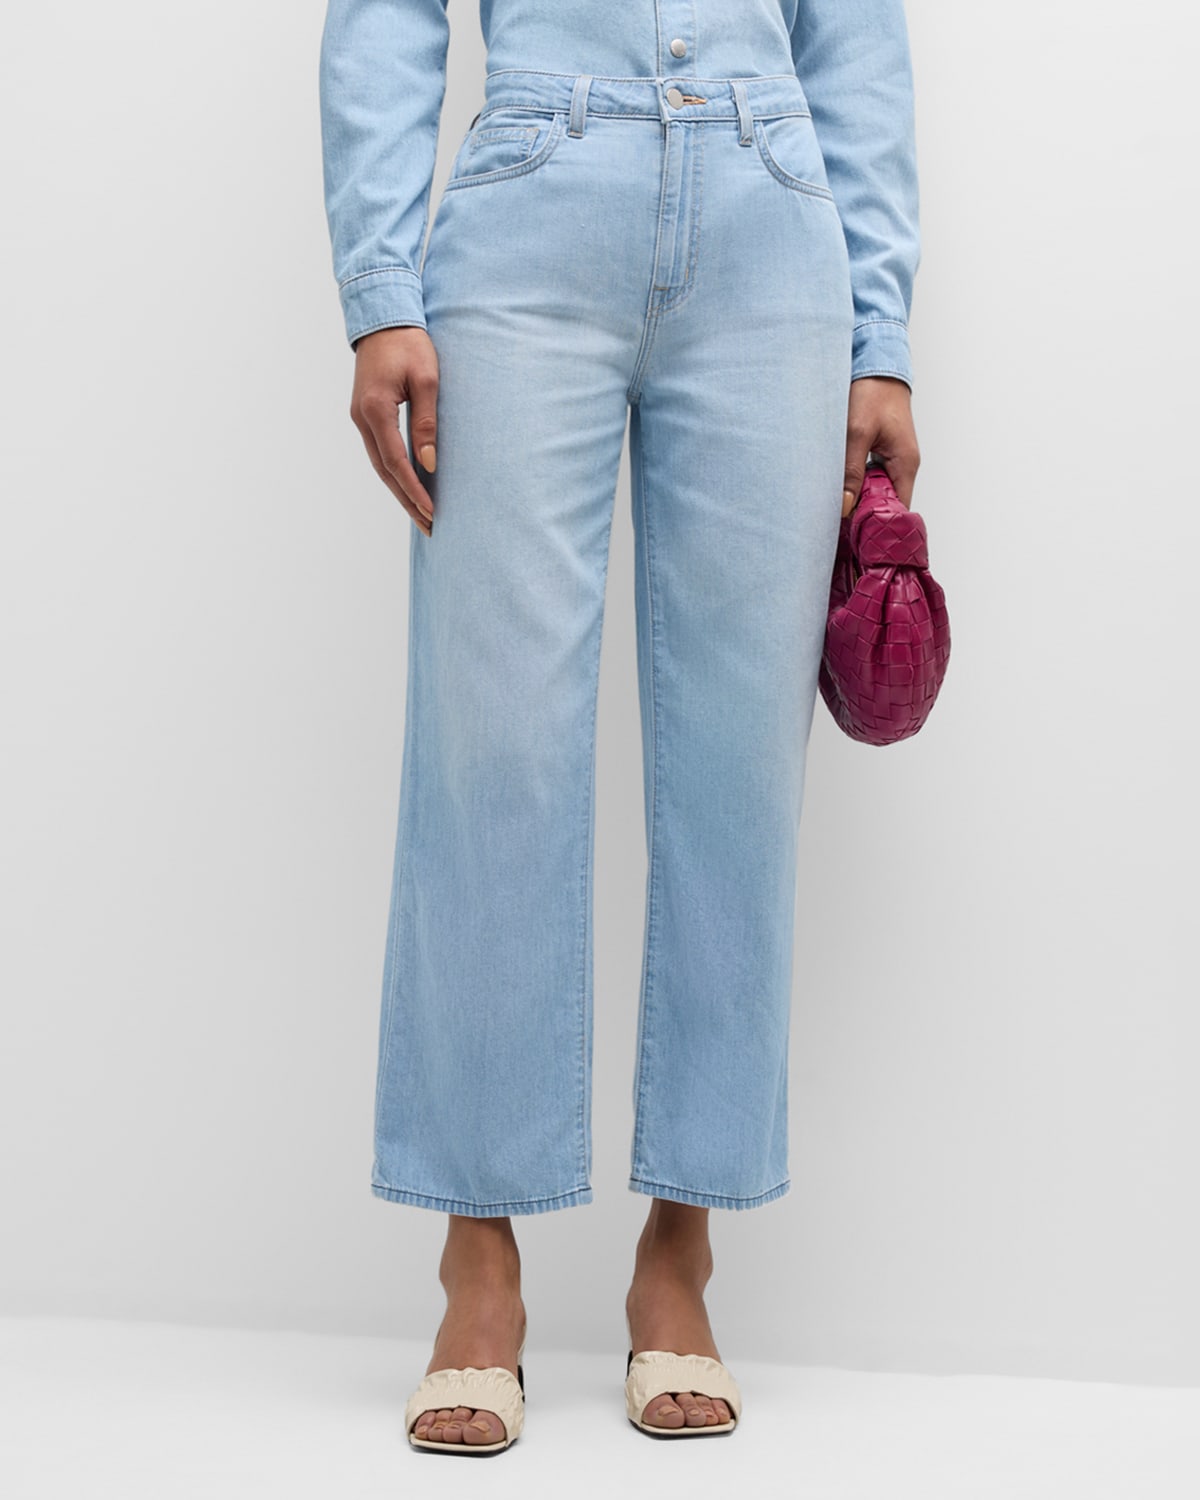 June Ultra High-Rise Crop Stovepipe Jeans